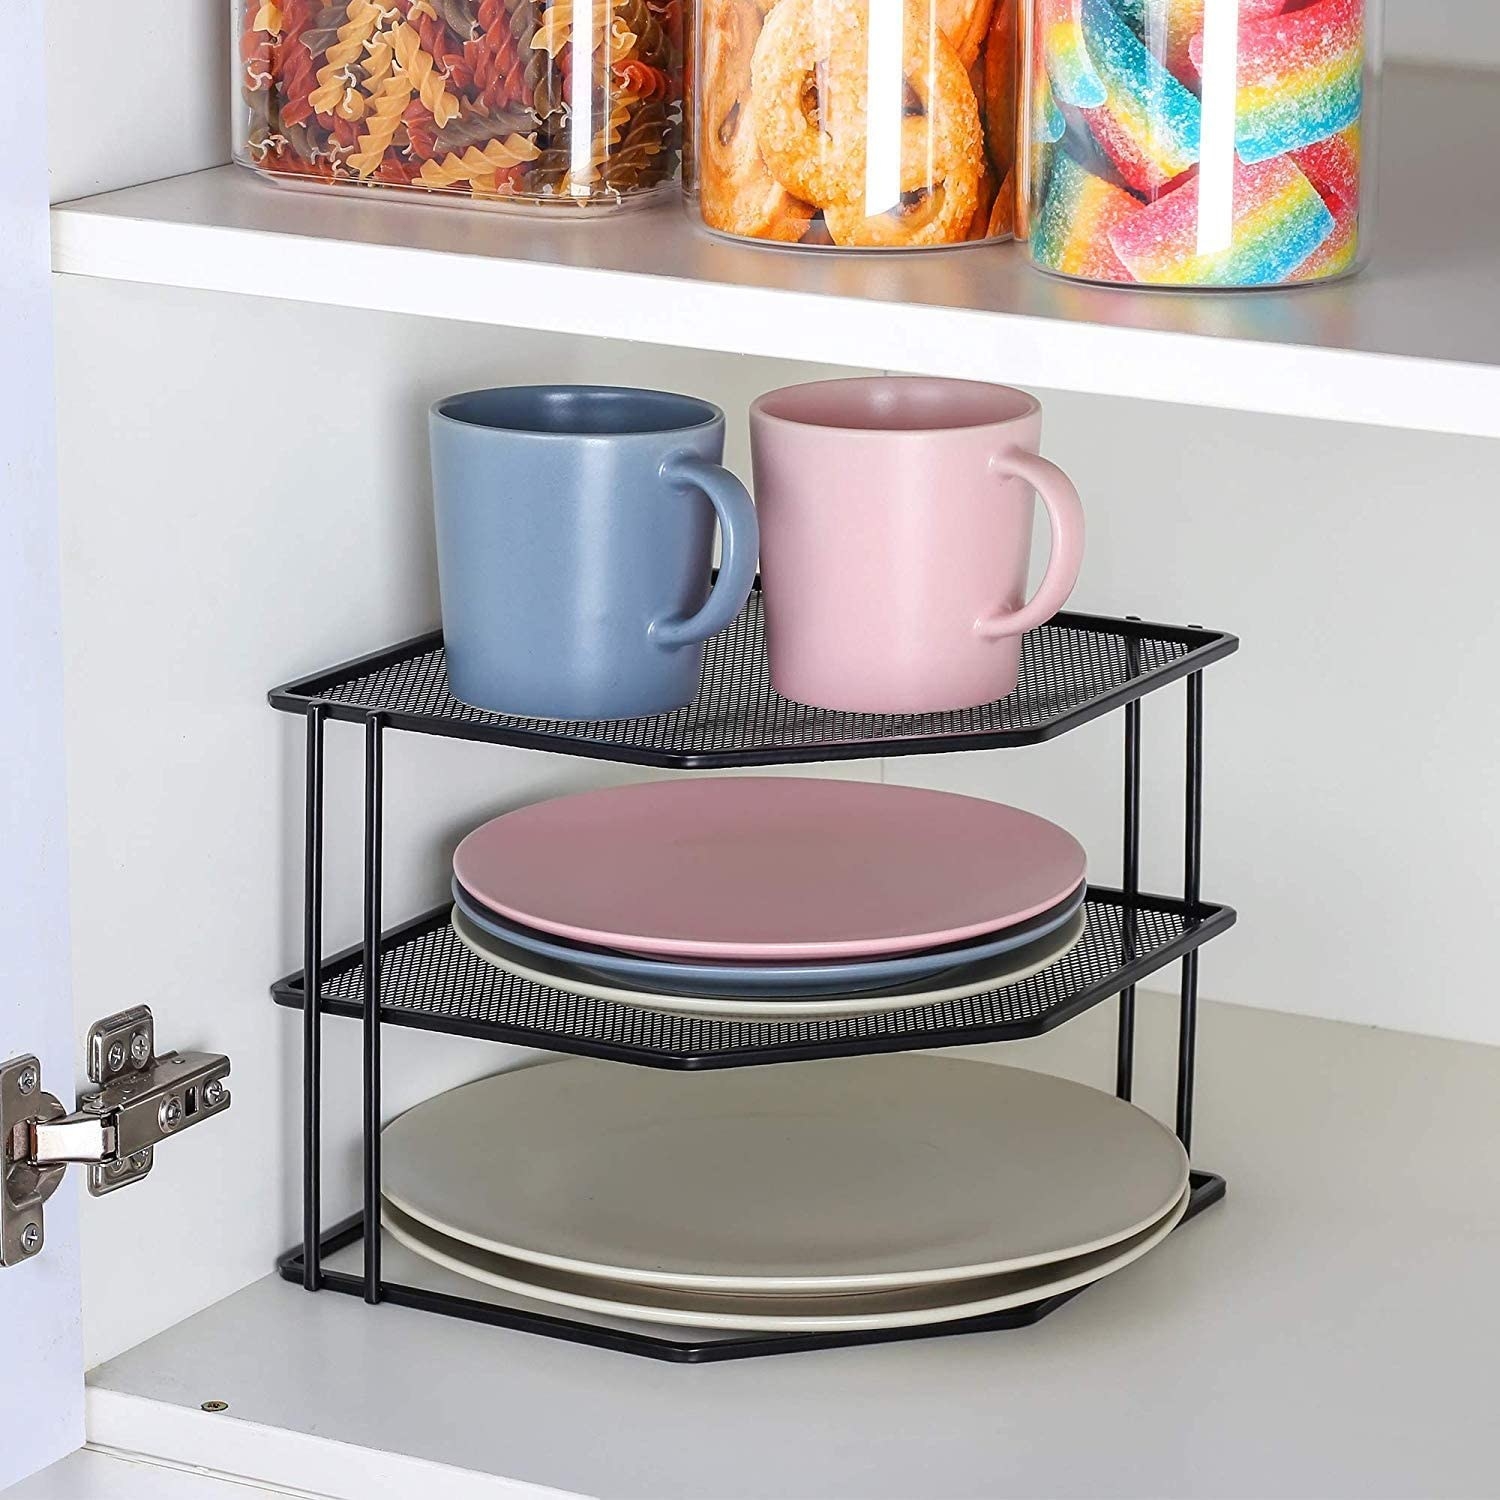 Dishes and cups placed on corner shelf in cabinet